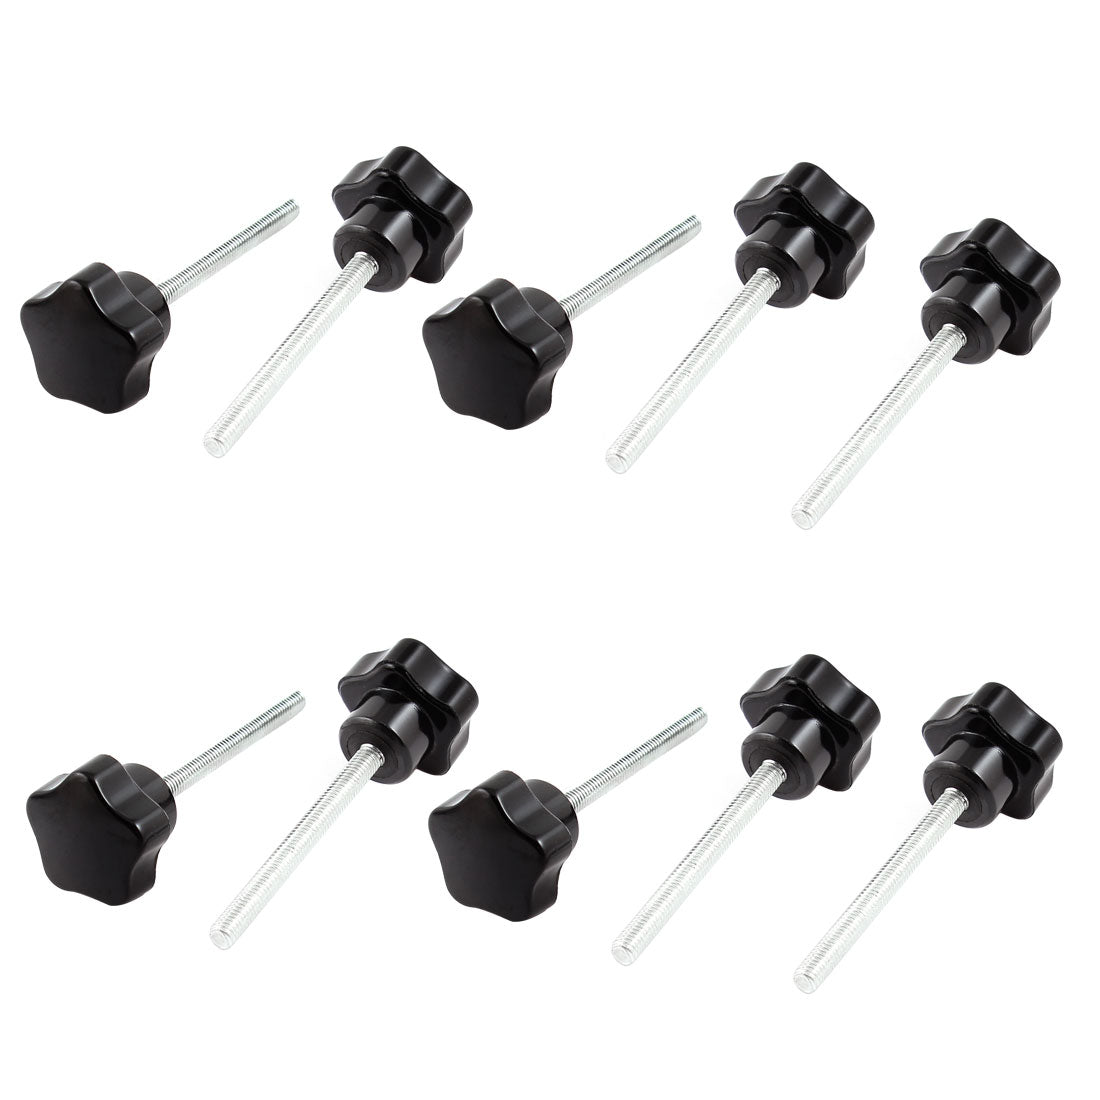 uxcell Uxcell 10pcs 5mm x 50mm Male Thread Straight 25mm Star Design Head Clamping Screw On Type Knob Black